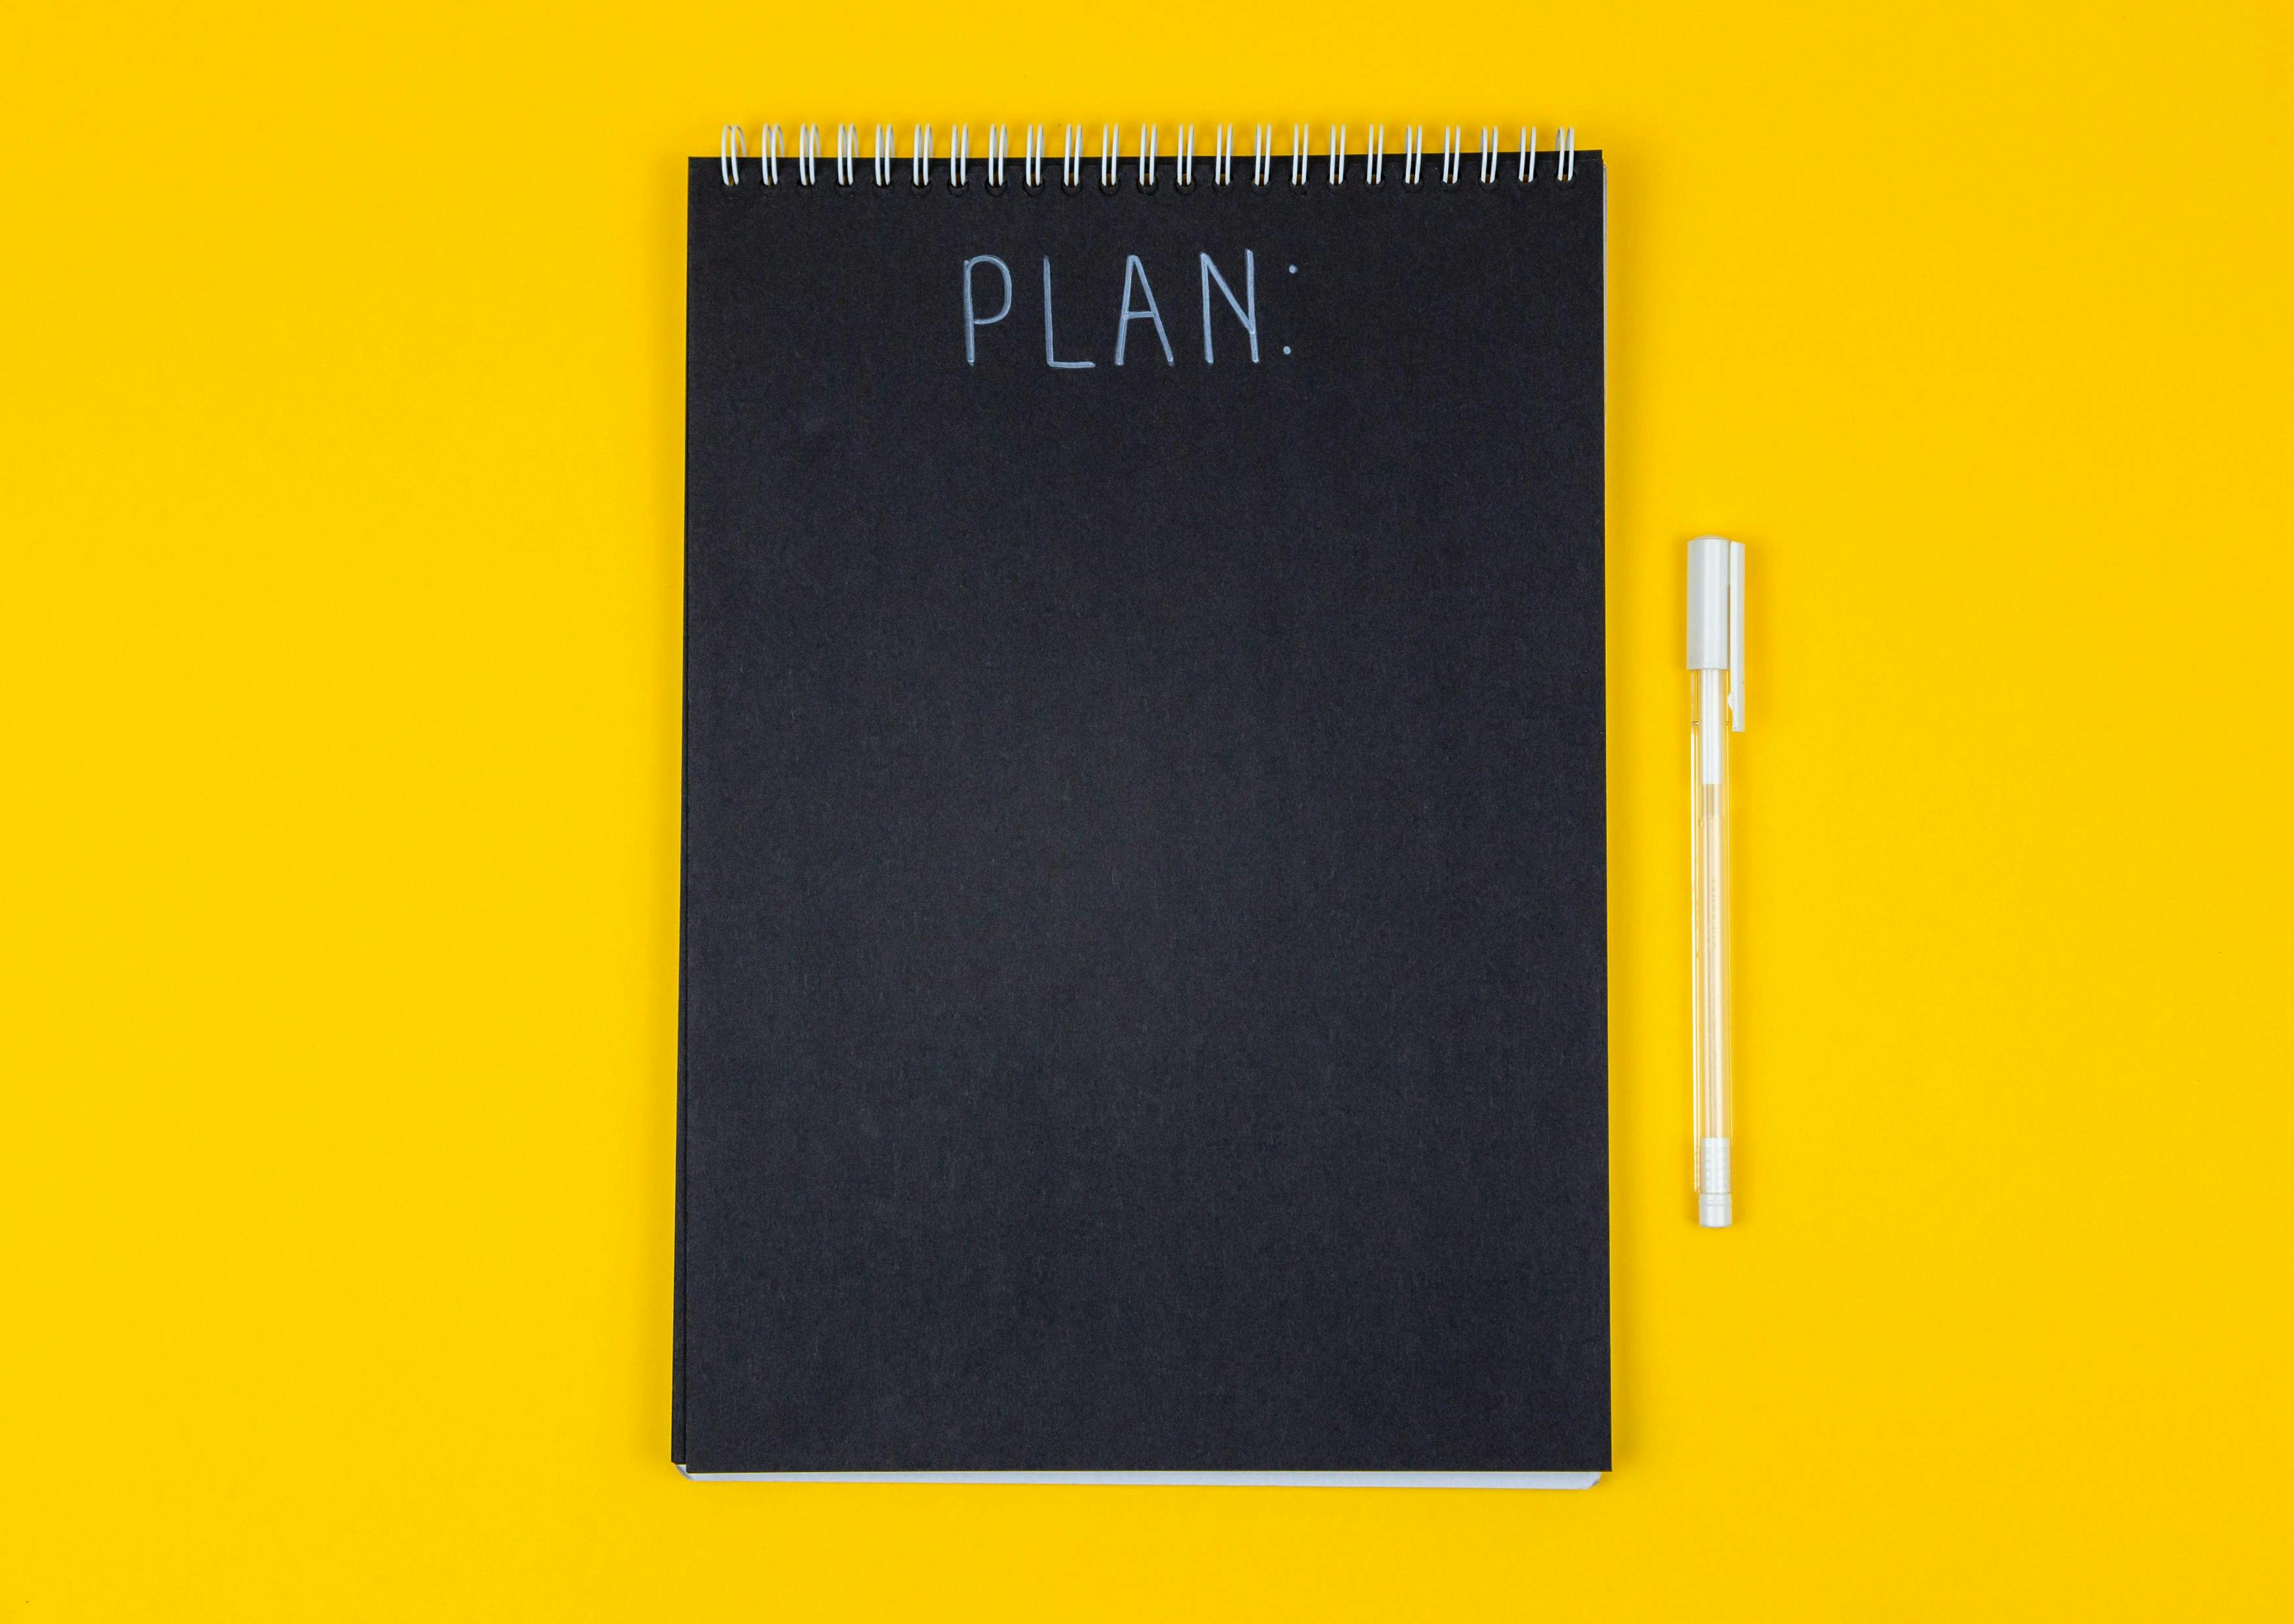 a black rectangular notepad with the word PLAN written on it